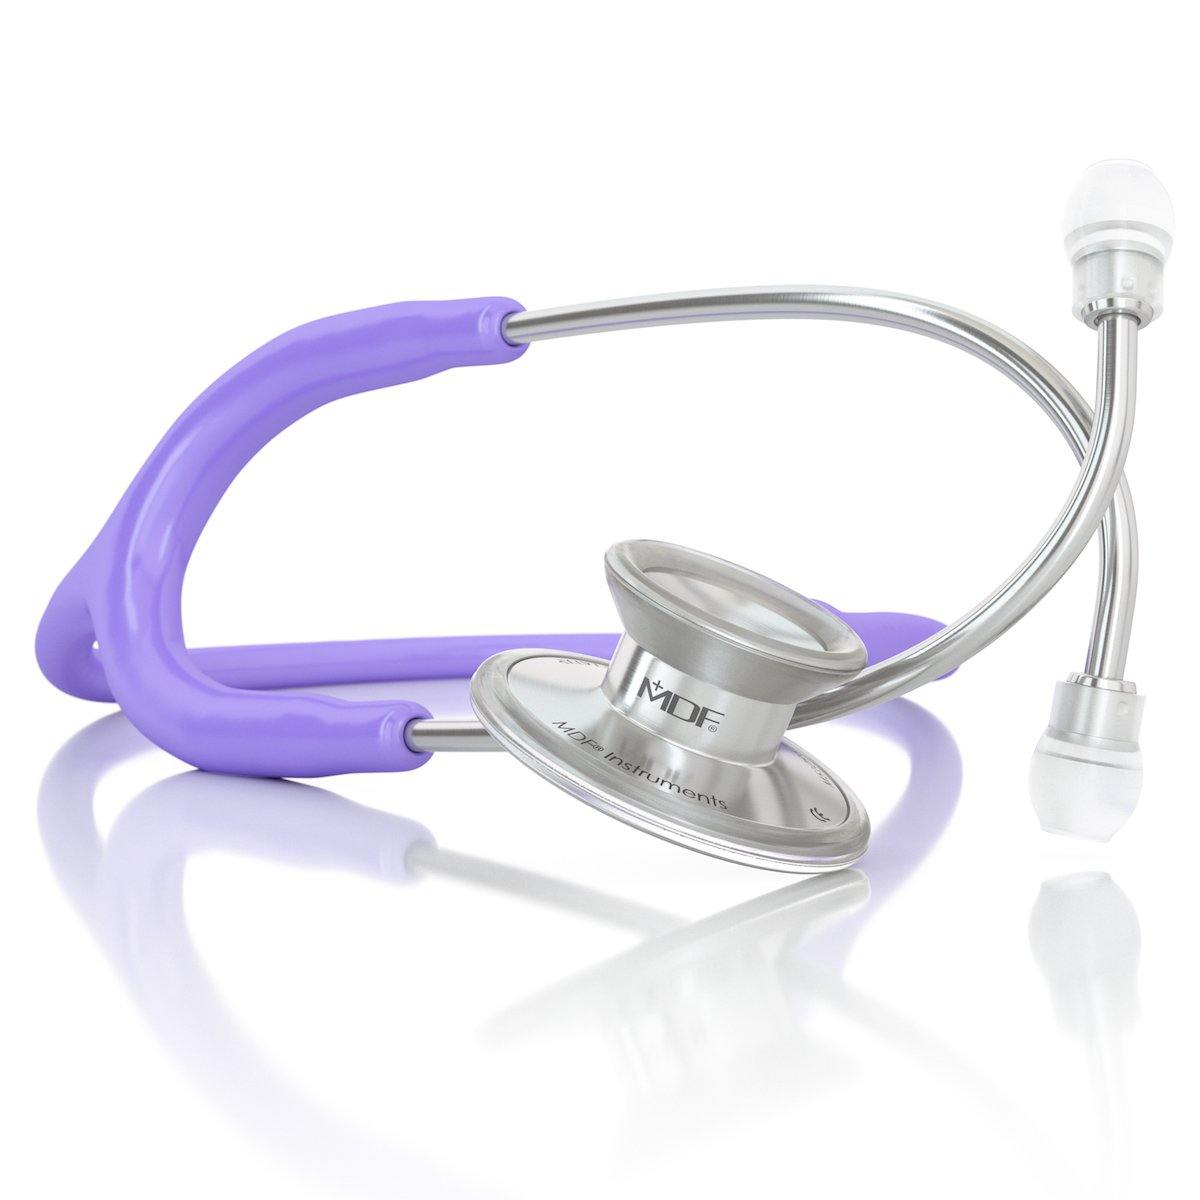 Acoustica® Stethoscope - Pastel Purple - MDF Instruments Official Store - Stethoscope